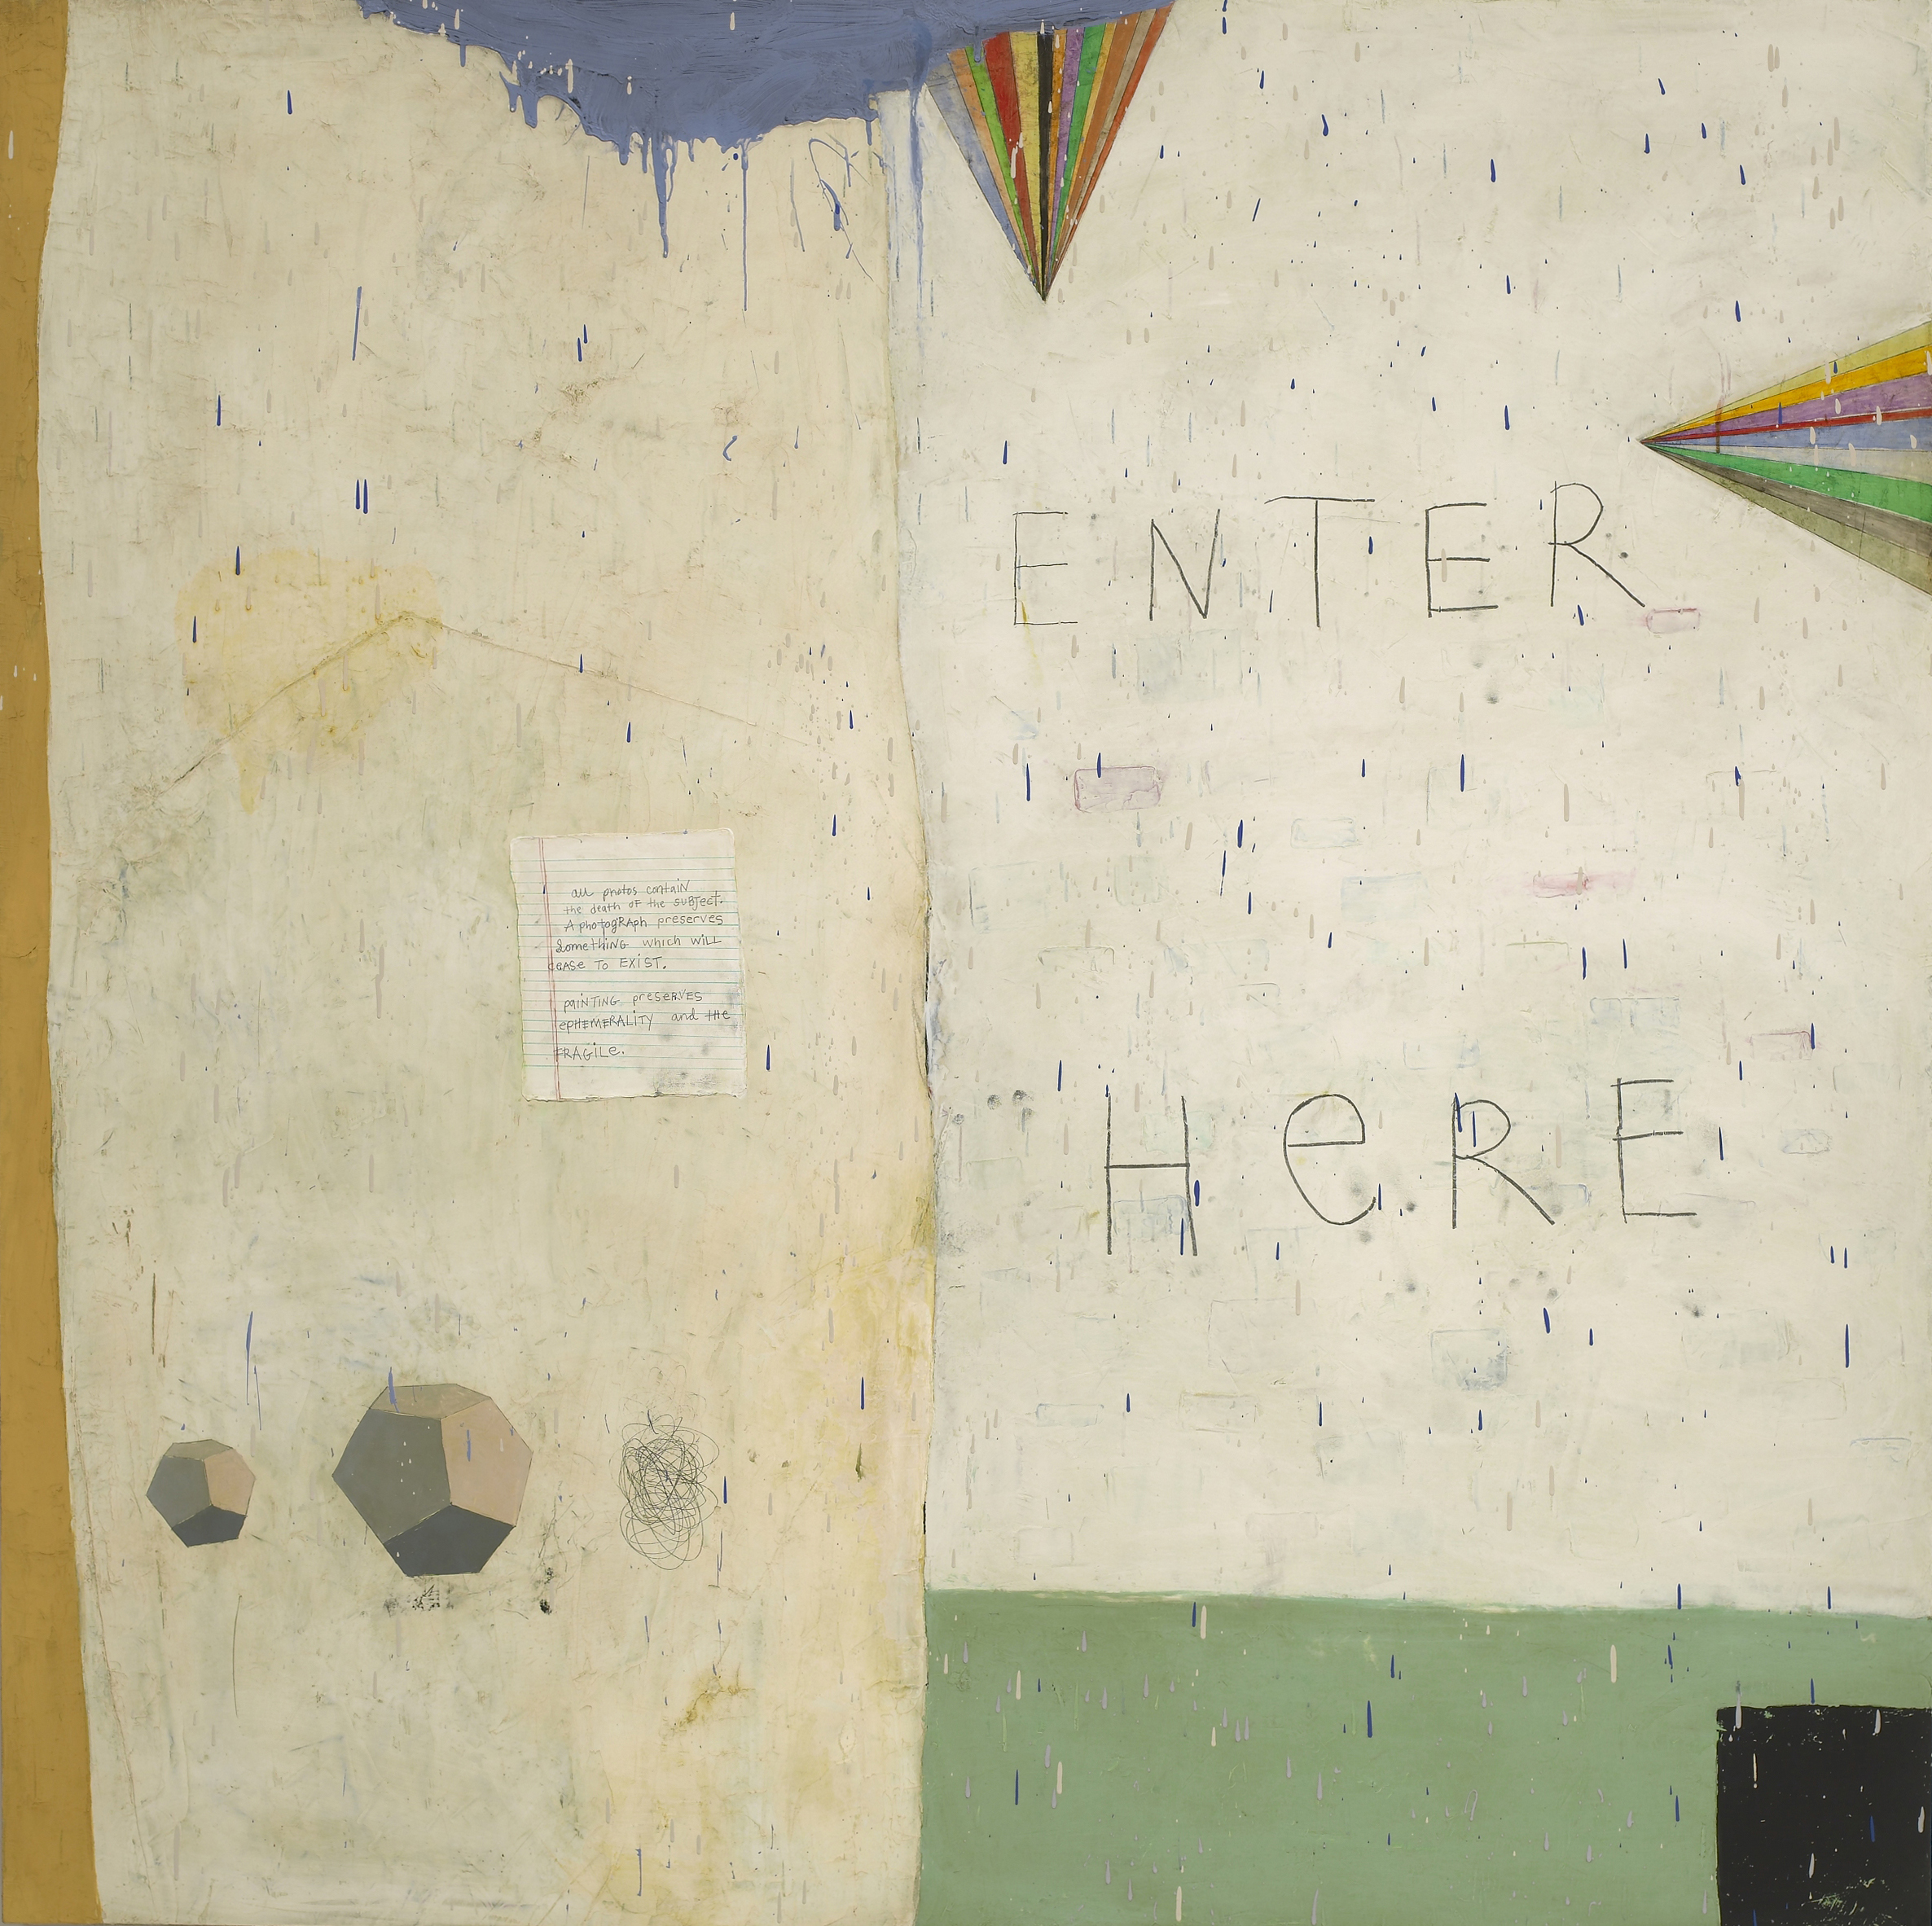   Squeak Carnwath   Beginner , 2008 oil and alkyd on canvas over panel 70 x 70 inches 177.8 x 177.8 cm 